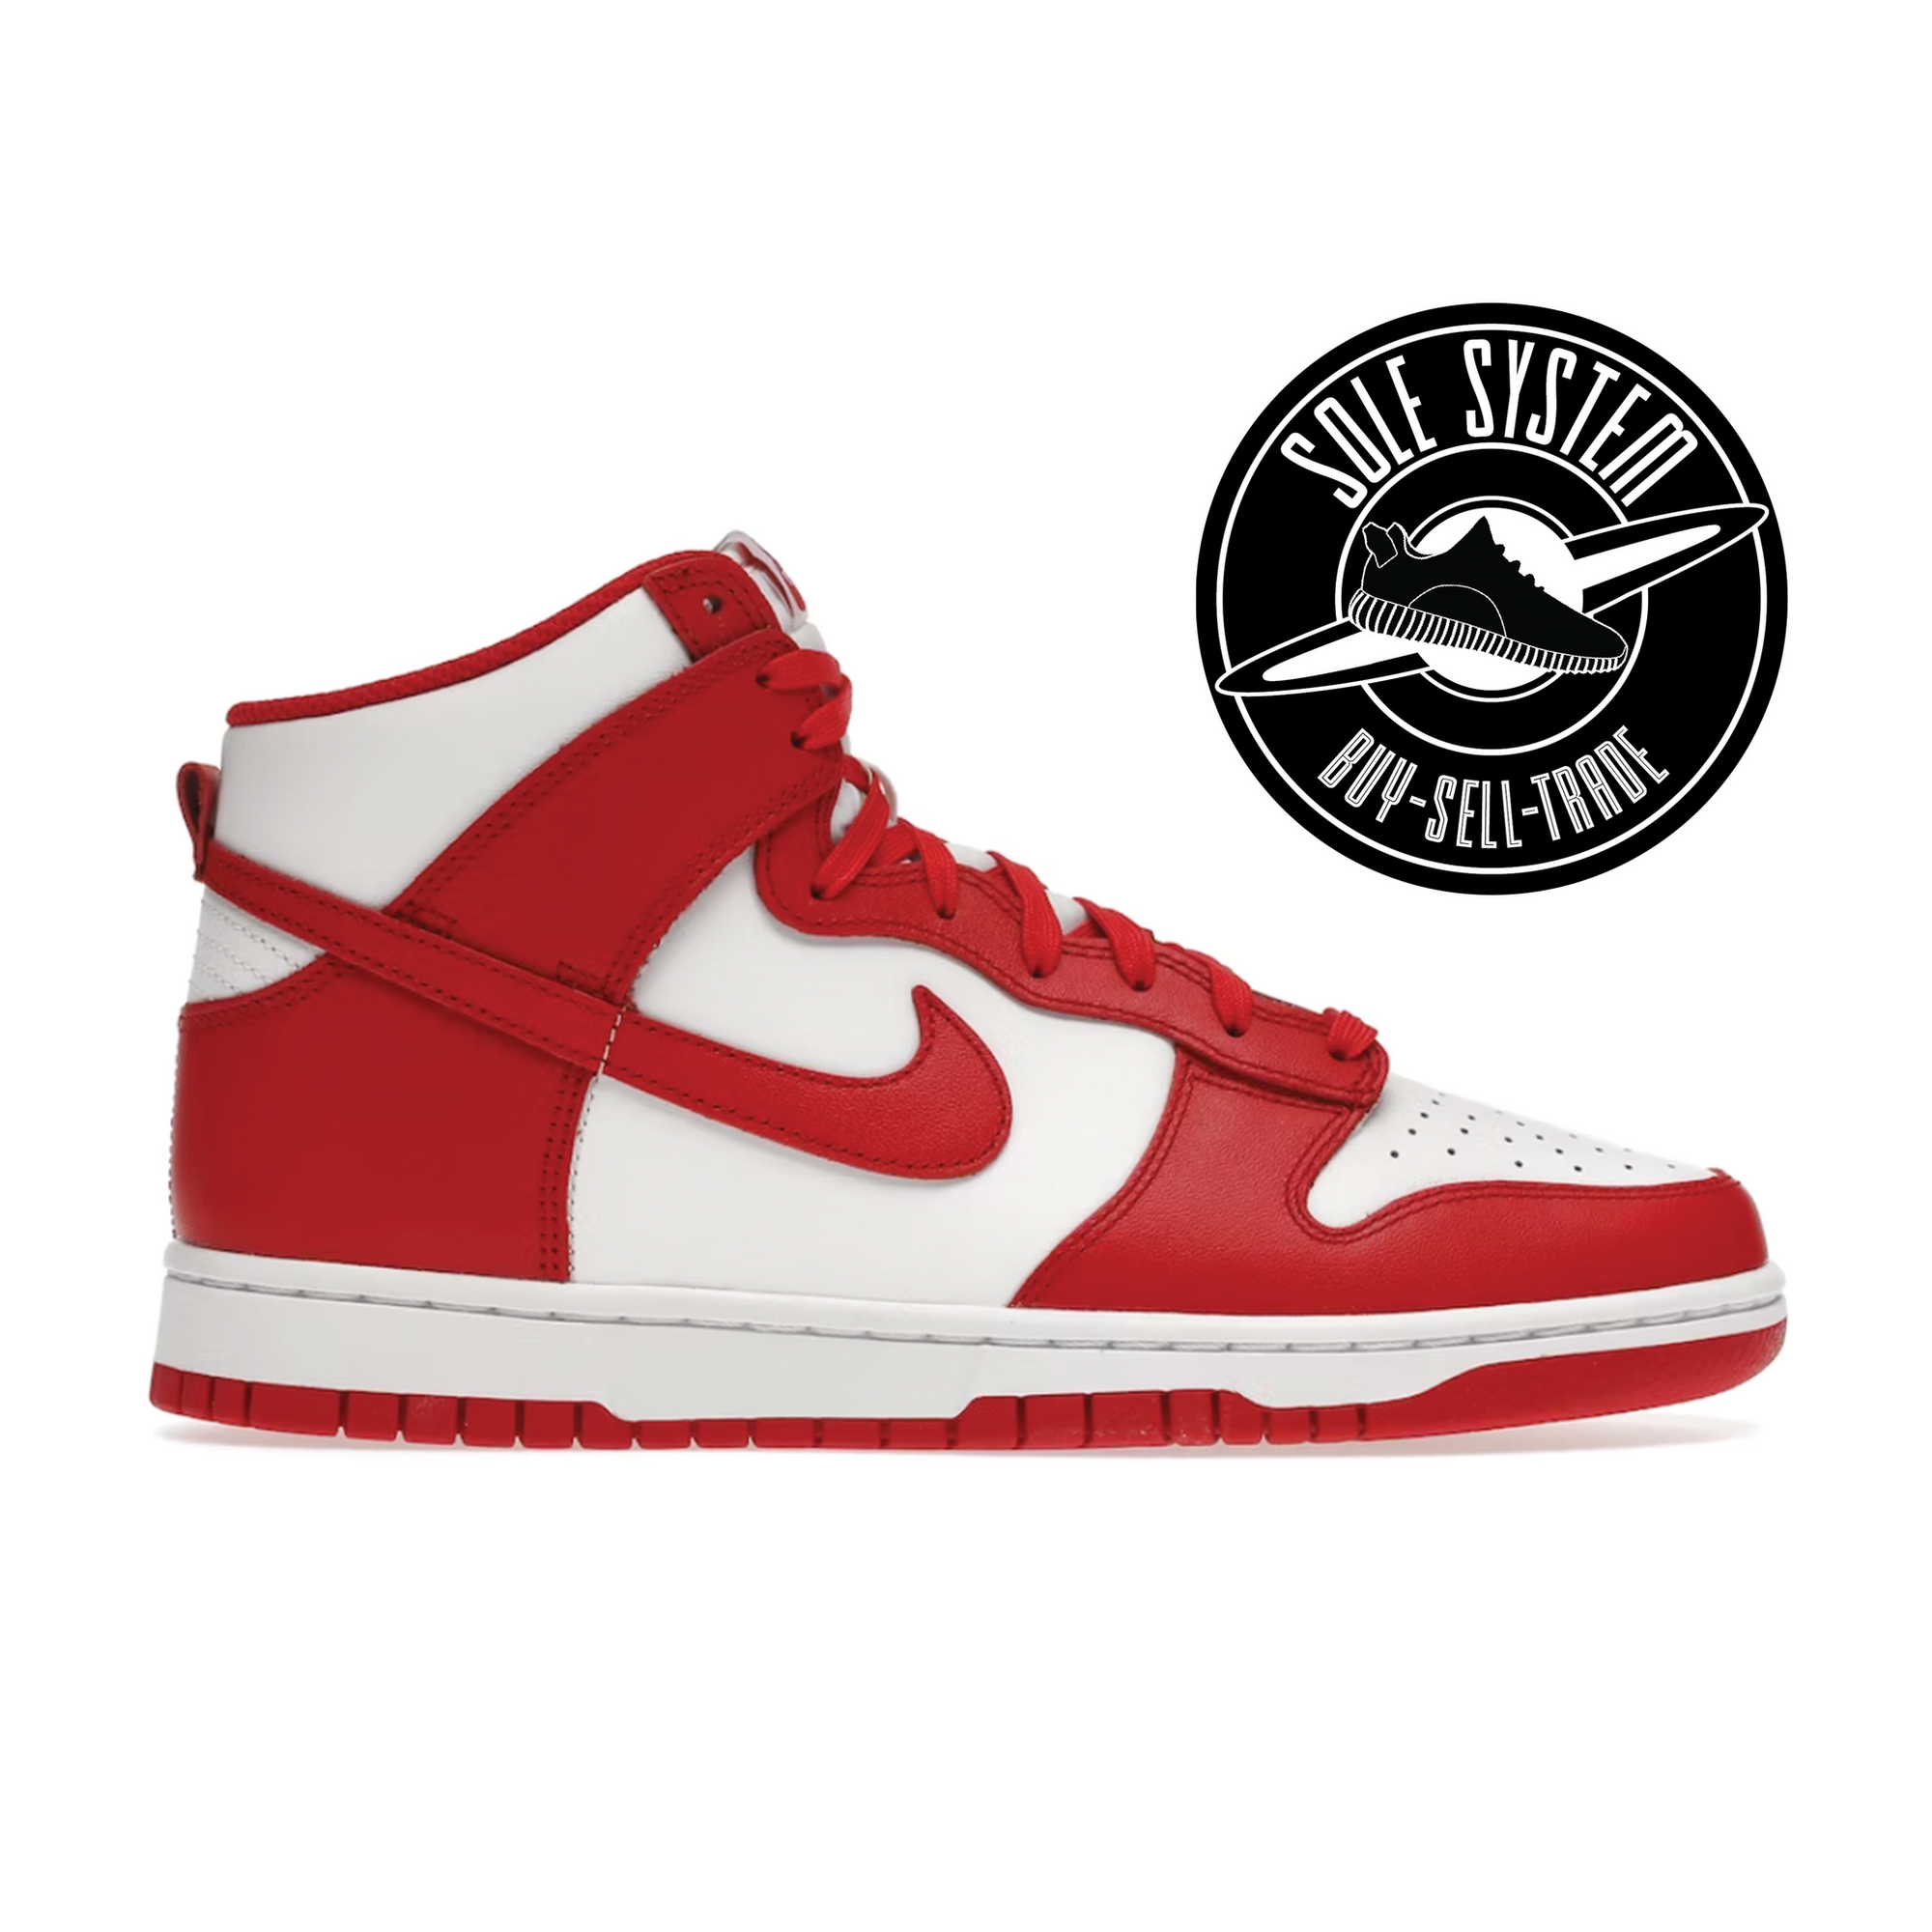 Nike Dunk High Championship White Red - Sole System